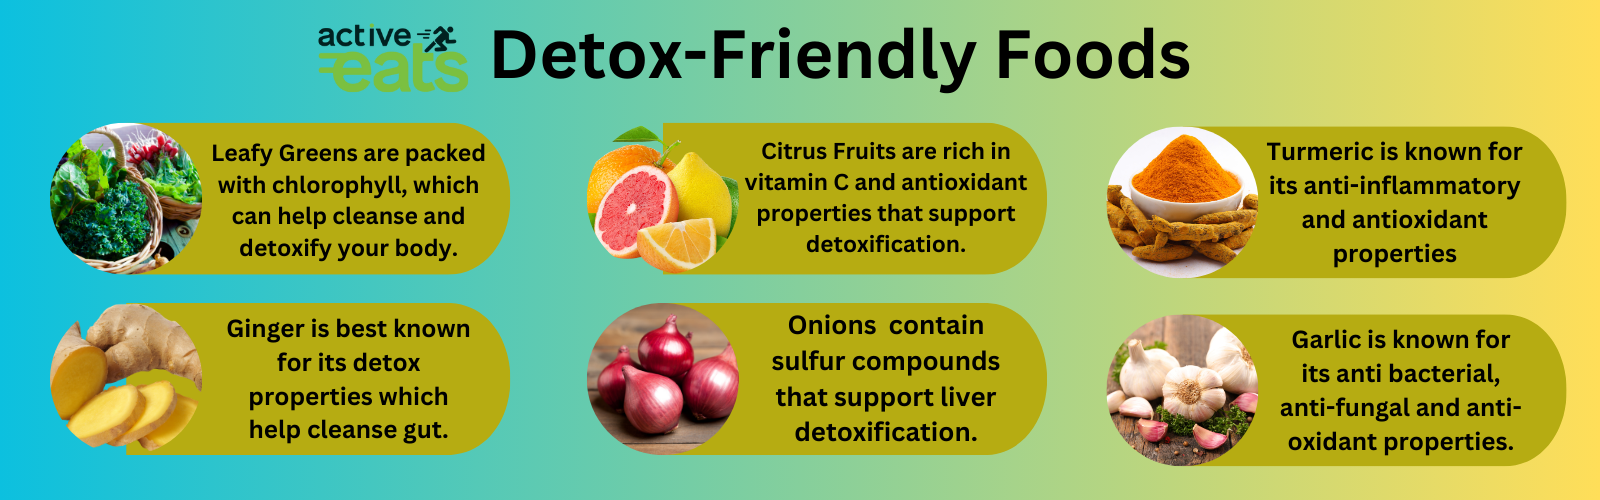 Image: A visual display of six detox-friendly foods. The image includes text and icons representing foods that are beneficial for detoxification, including leafy greens, citrus fruits, berries, cruciferous vegetables, nuts and seeds, and herbal teas. This image serves as a quick reference for selecting nutritious options to support the detox process.